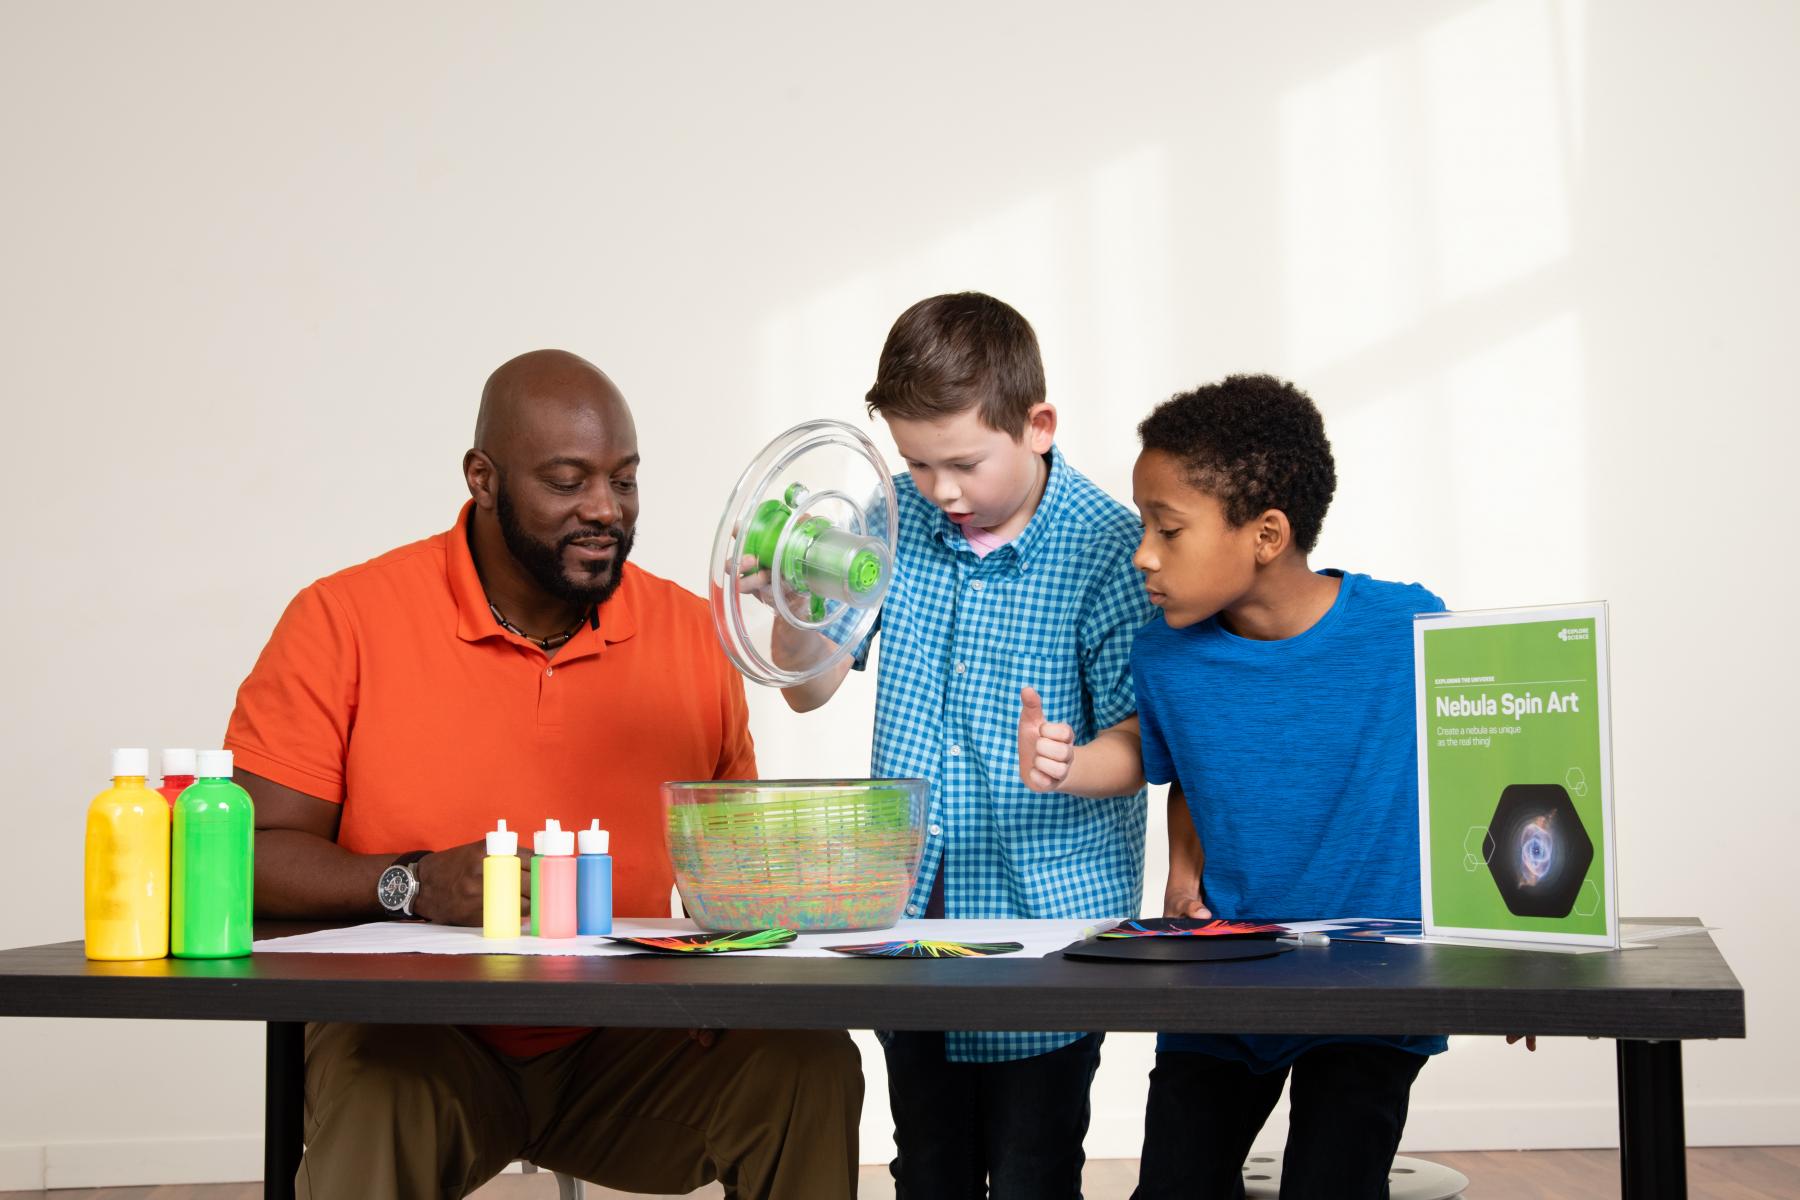 An adult and two children work at a table making science art